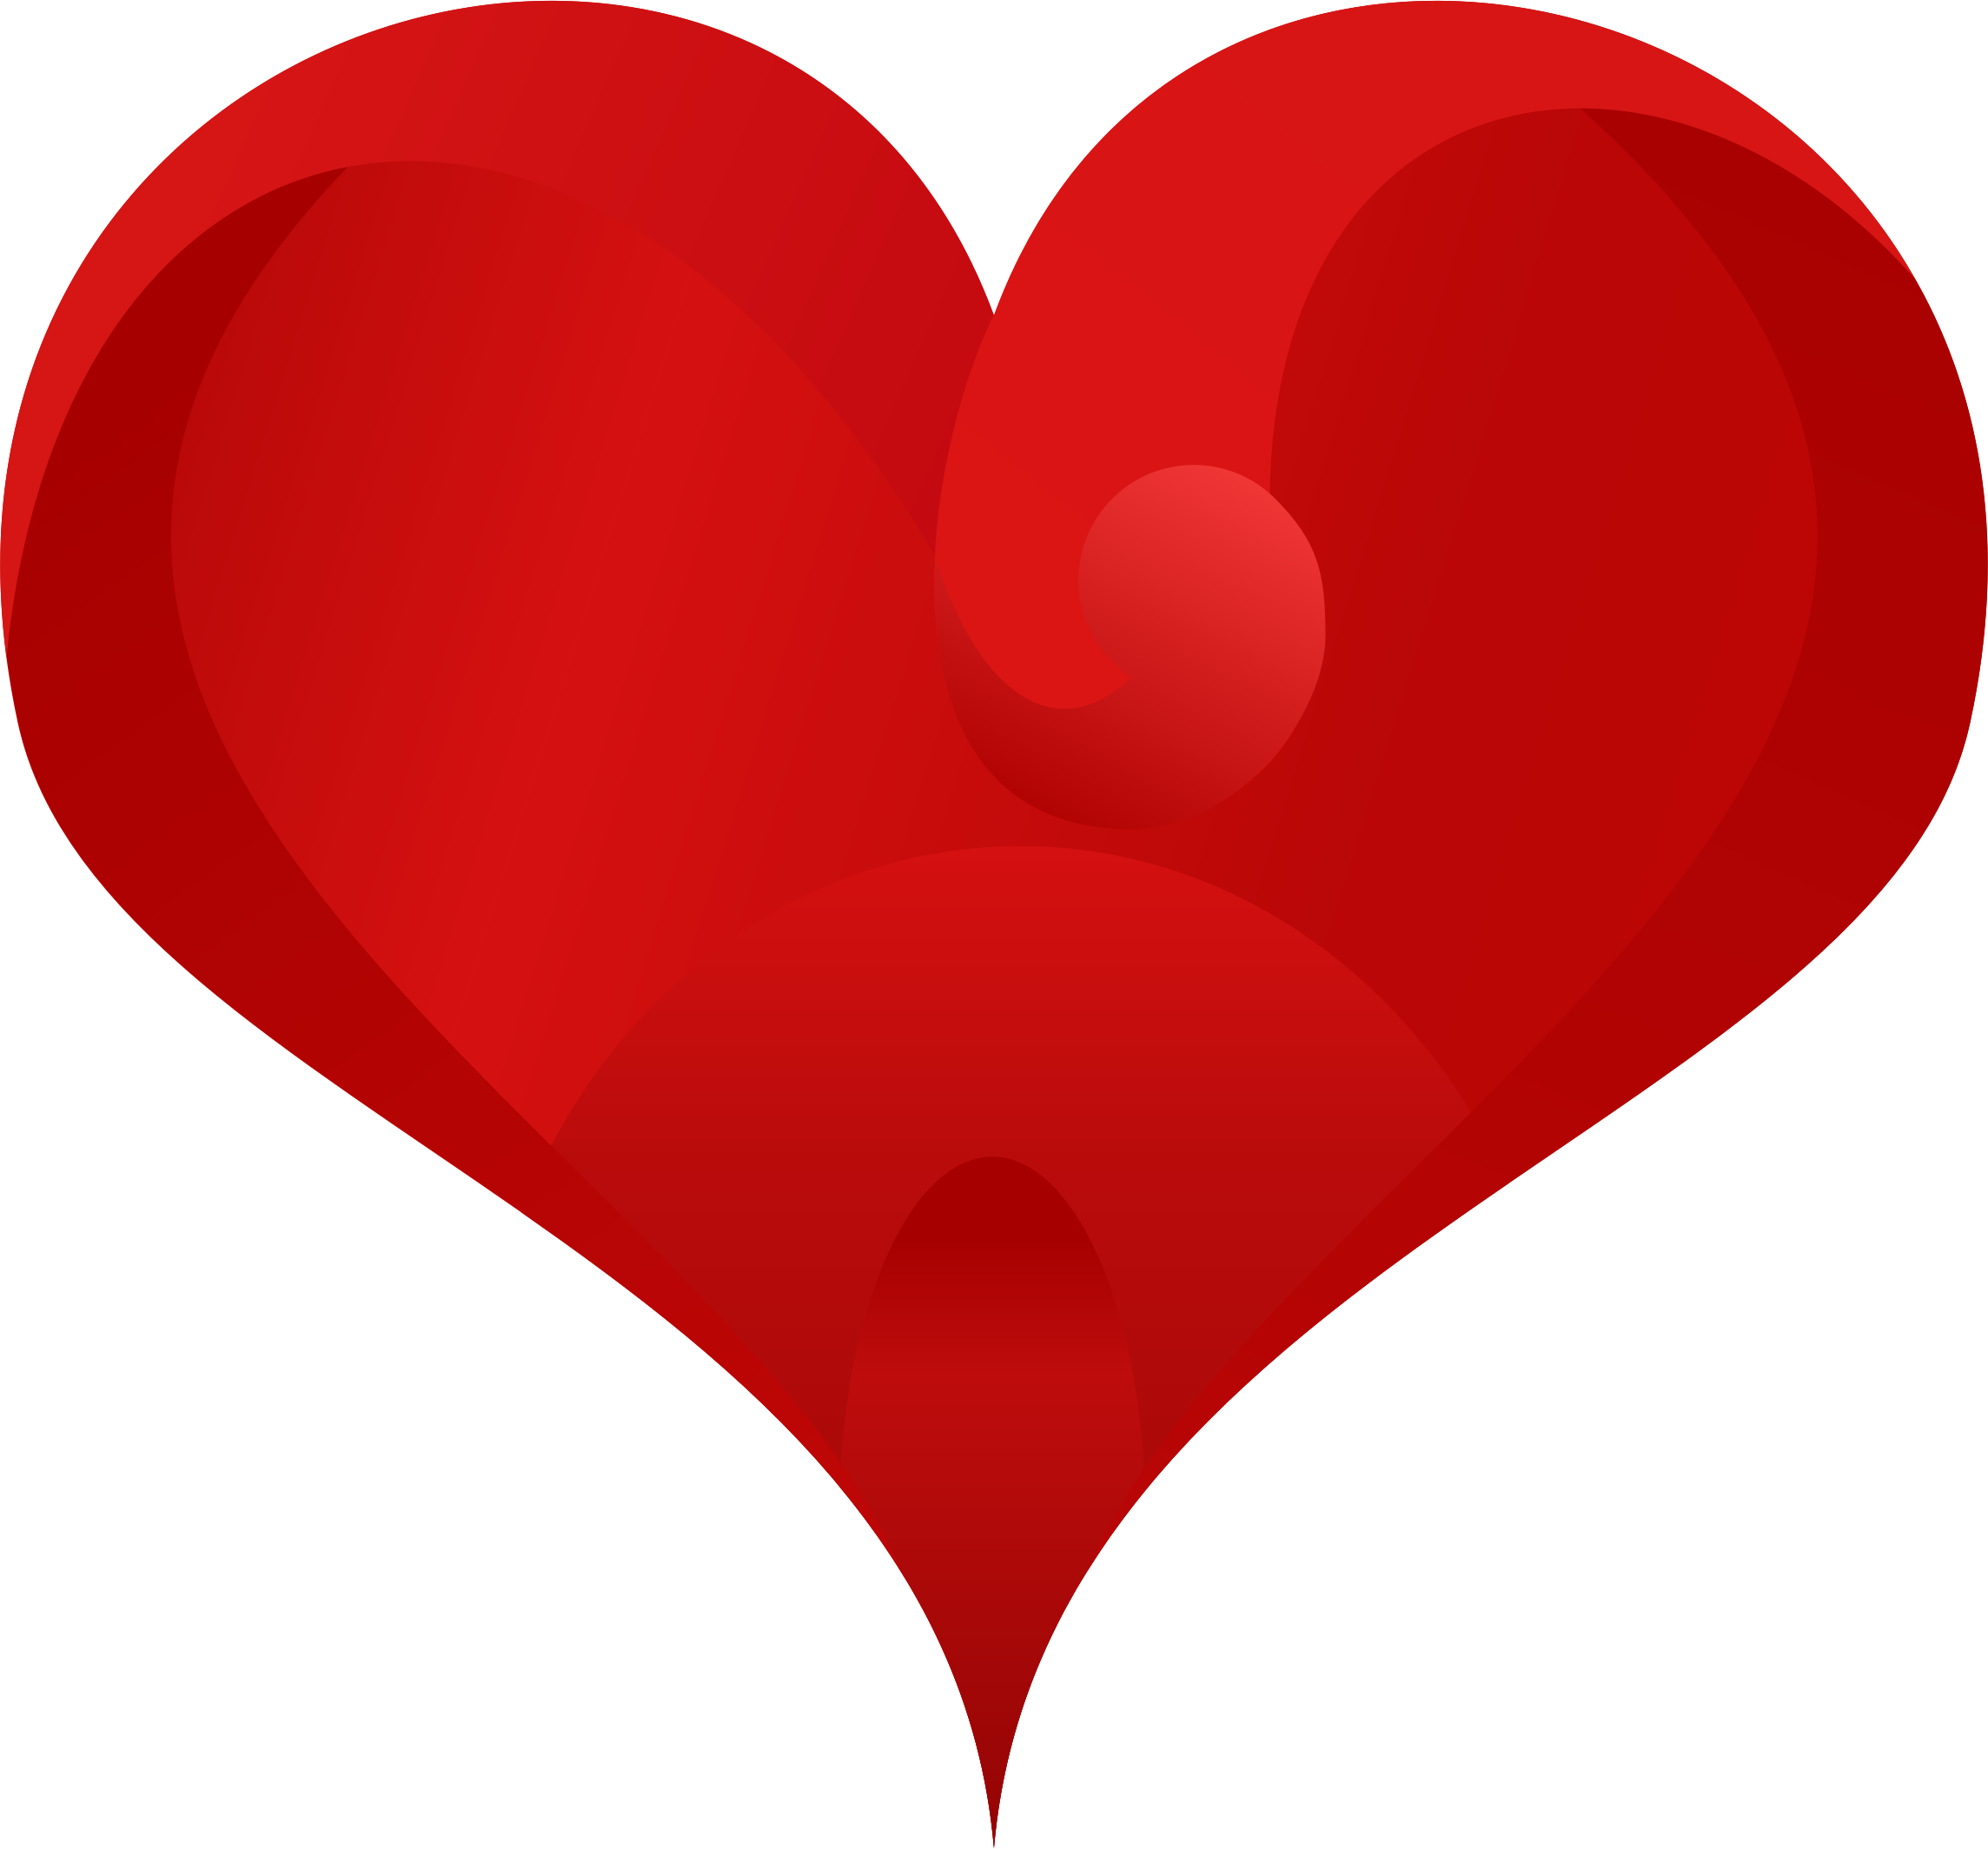 big red heart clipart - photo #24